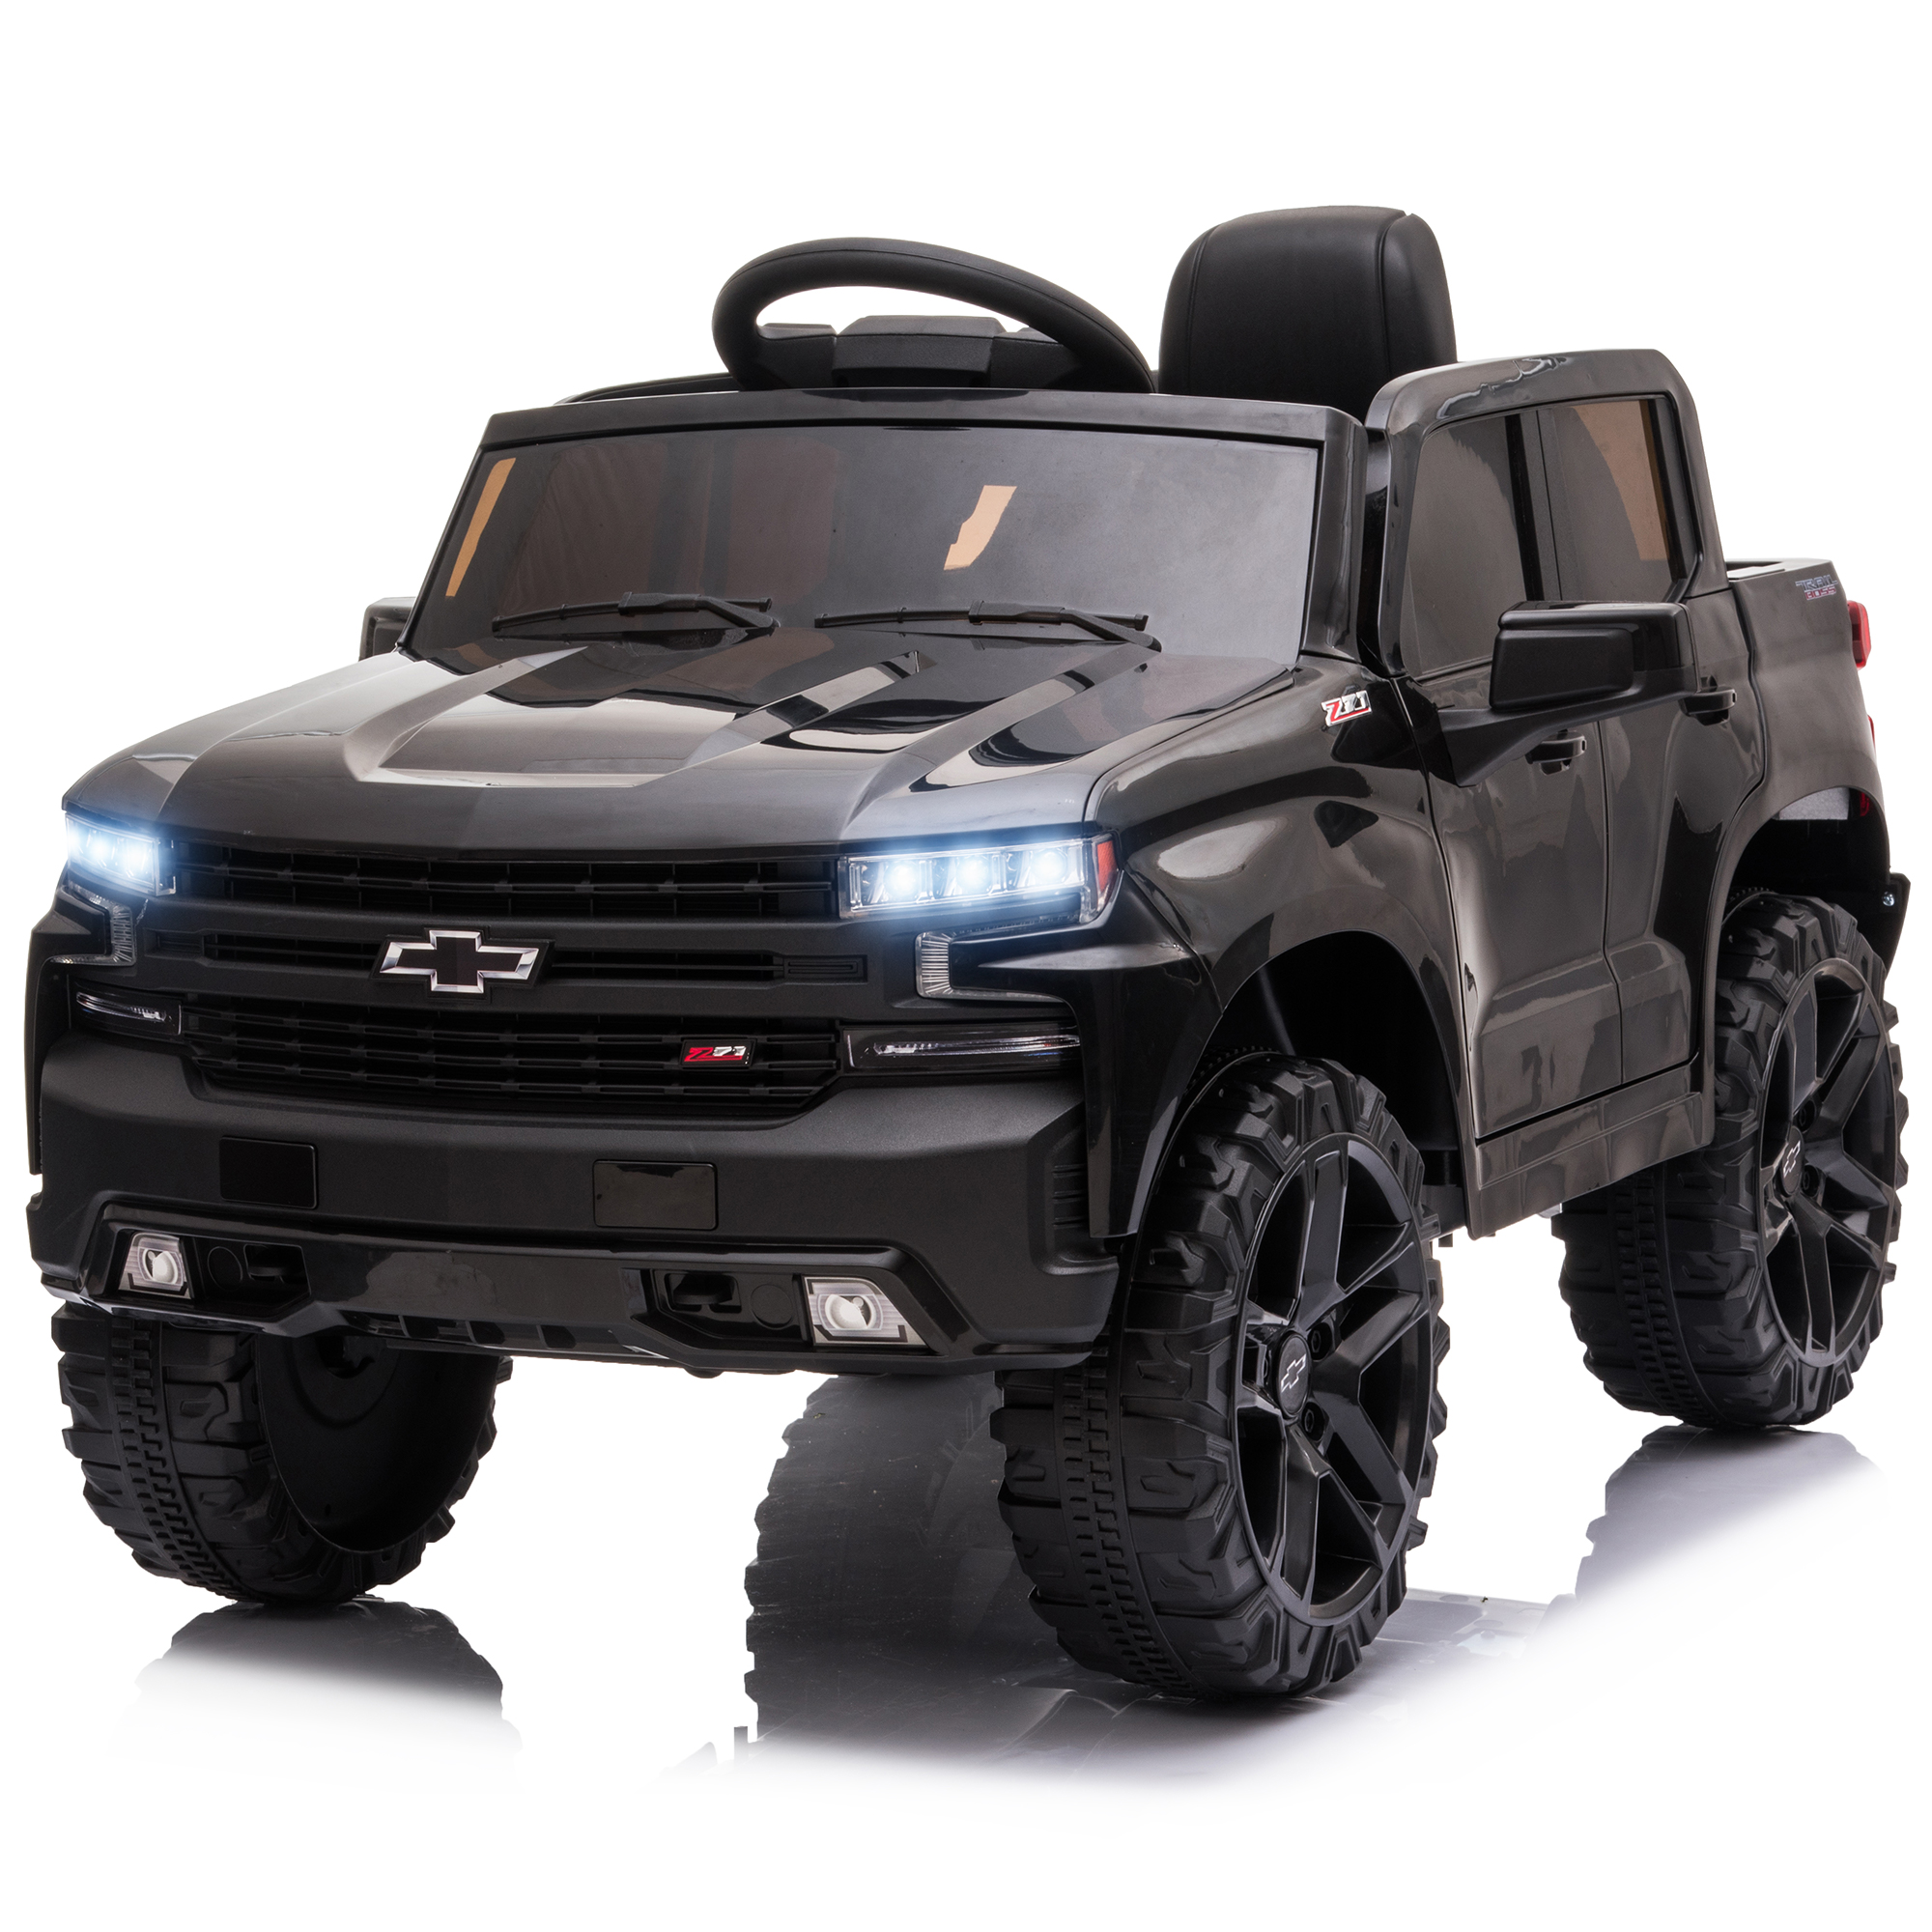 Official Licensed Chevrolet Ride On Car, 12V Ride-On Truck Toy for Kids, Electric 4 Wheels Kids Toy w/Parent Remote Control, Foot Pedal, MP3 Player, 2 Speeds, Ages 3-5 Years - image 1 of 9